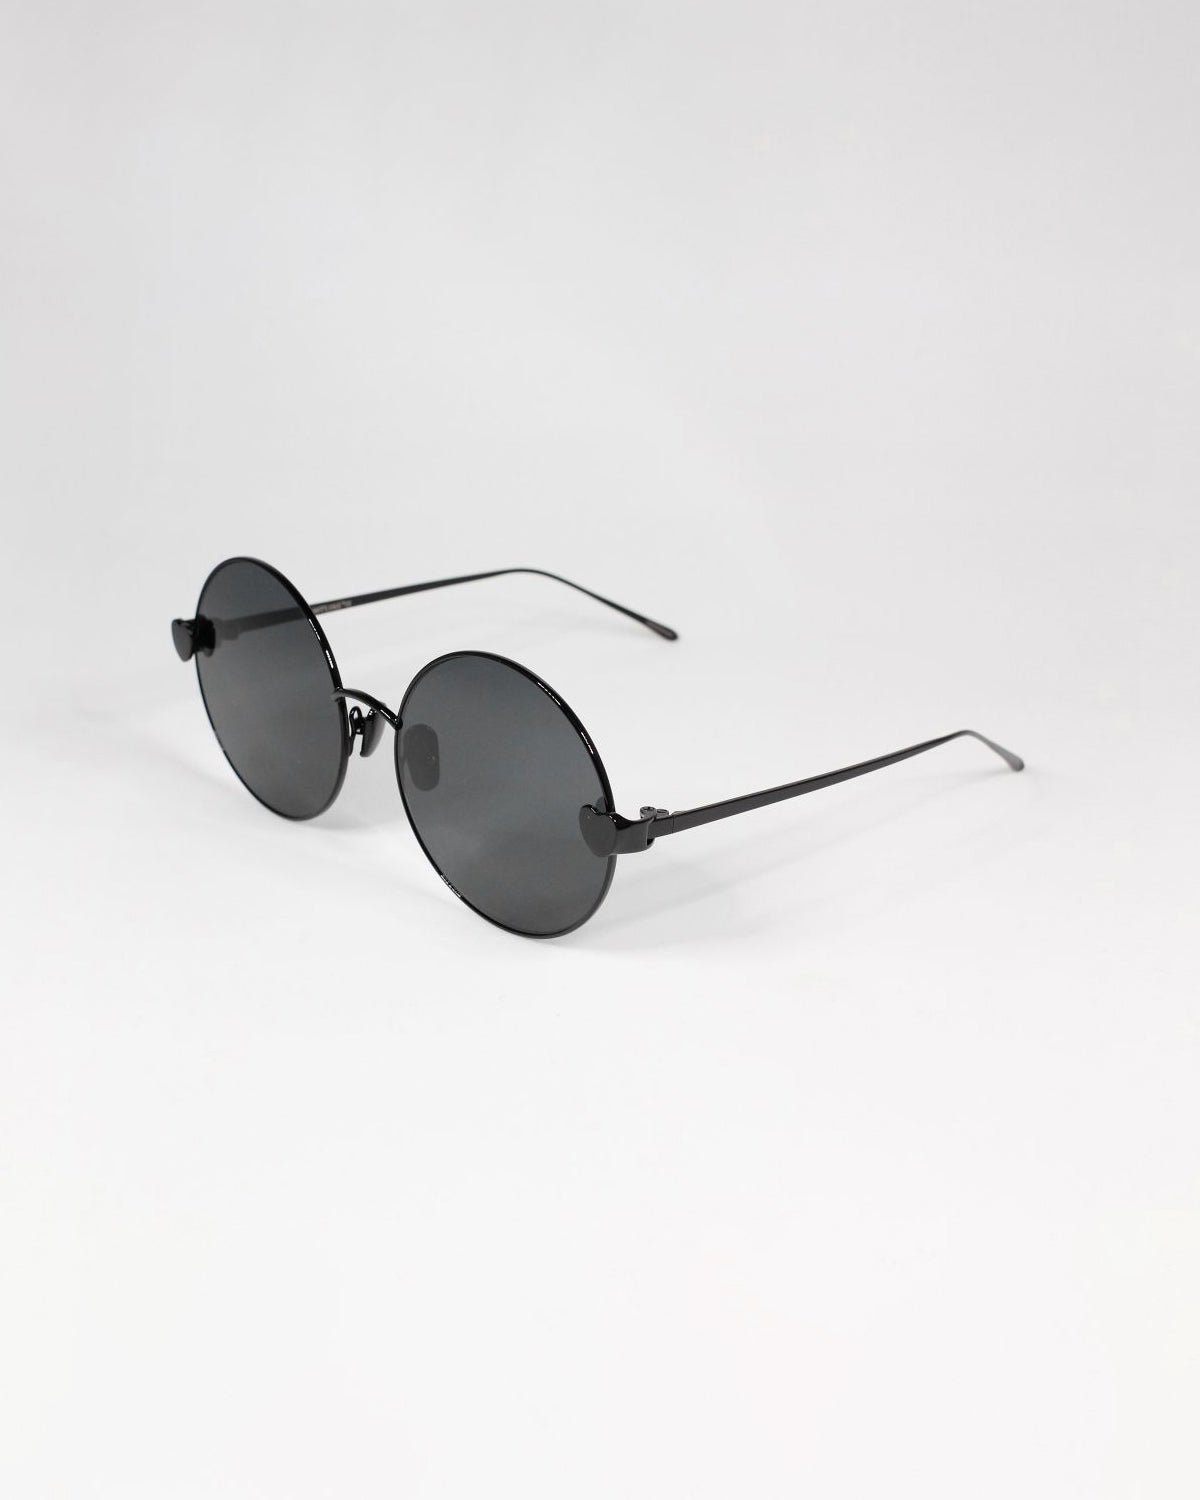 A pair of black round For Art&#39;s Sake® Love Story shades with thin stainless steel frames and dark lenses is placed on a plain white background. The design is minimalist and sleek, offering both style and UV protection.